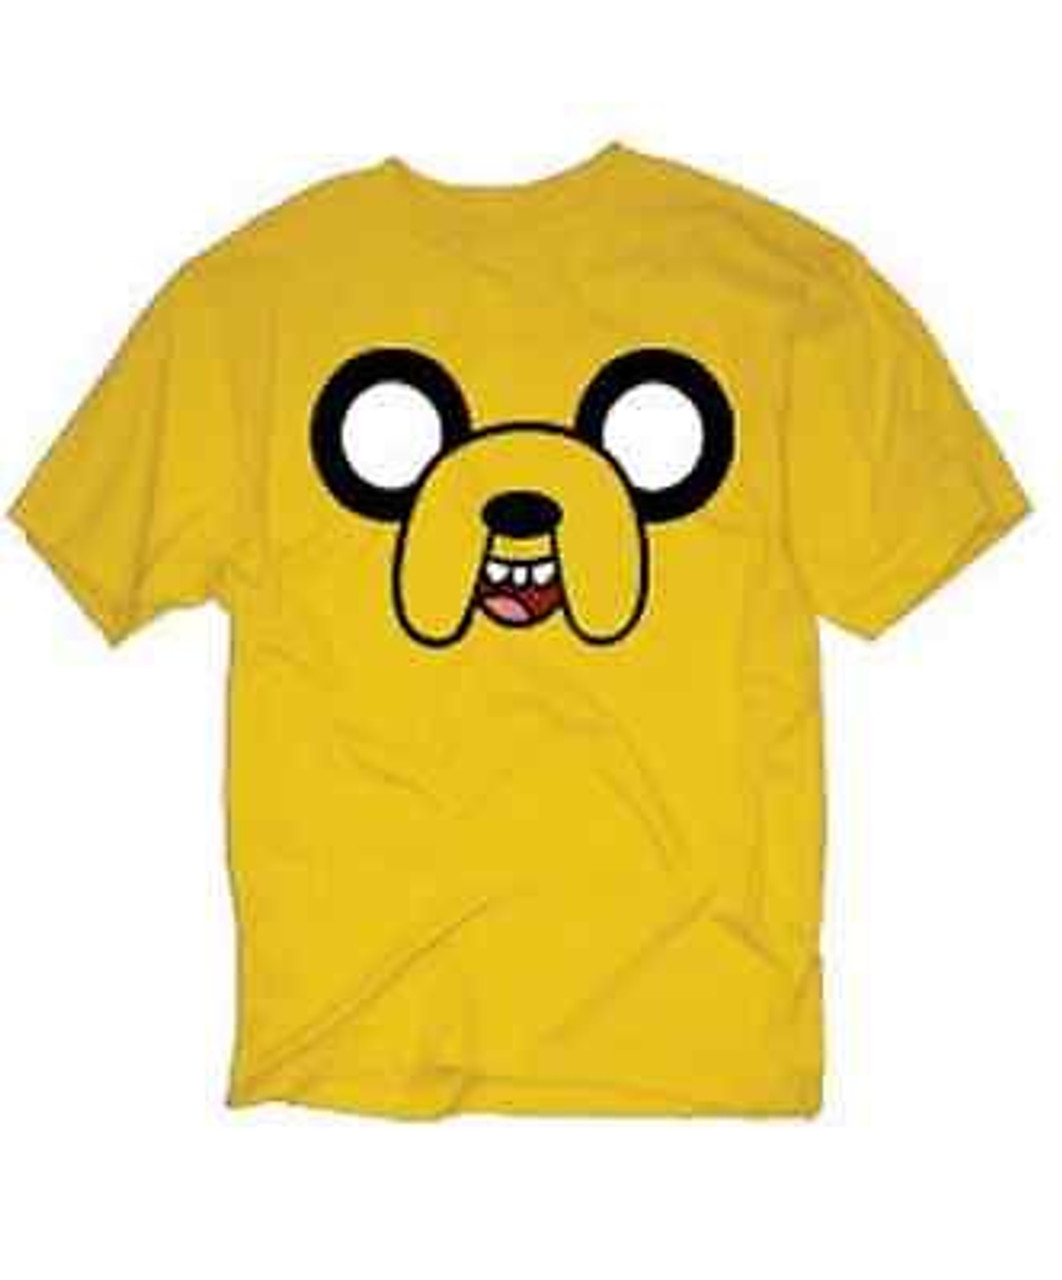 Authentic Cartoon Network Adventure Time With Finn & Jake Face T Tee Shirt  Xl - Fearless Apparel